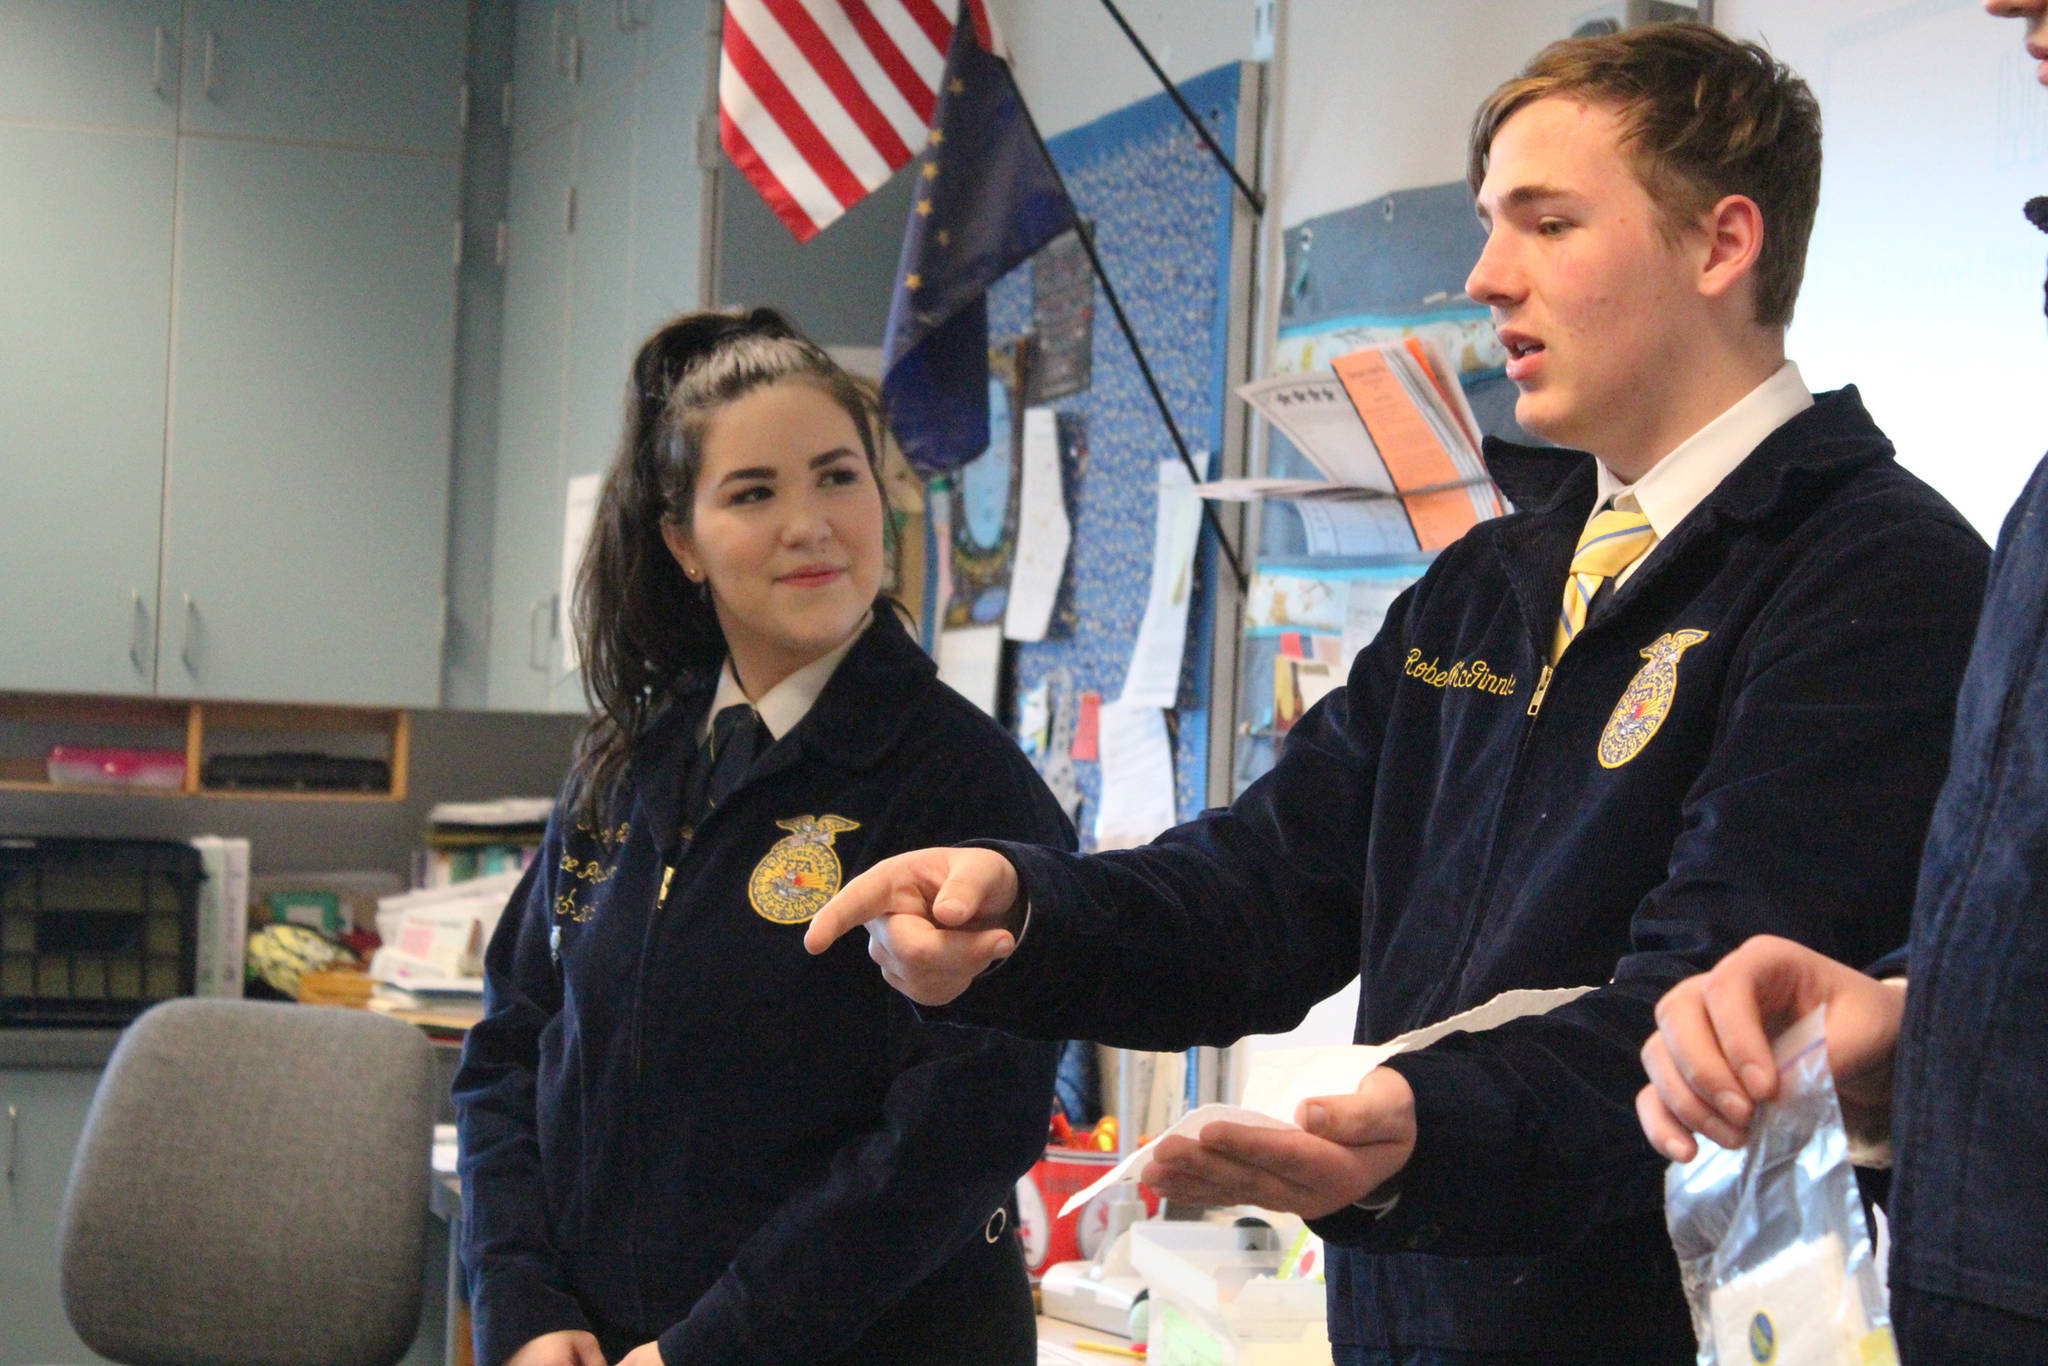 Ninilchik School junior Jodie Kain, senior Robert McGinnis, center, and sophomore Jacob Clark, far right, explain a seed tape project to a group of fourth, fifth and sixth graders Tuesday, May 1, 2018 at the school in Ninilchik, Alaska. The Ninilchik chapter of the National FFA Organization brought a program to the younger students for the first time, teaching them about planting carrot seeds, in honor of Alaska Agriculture Day. (Photo by Megan Pacer/Homer News)